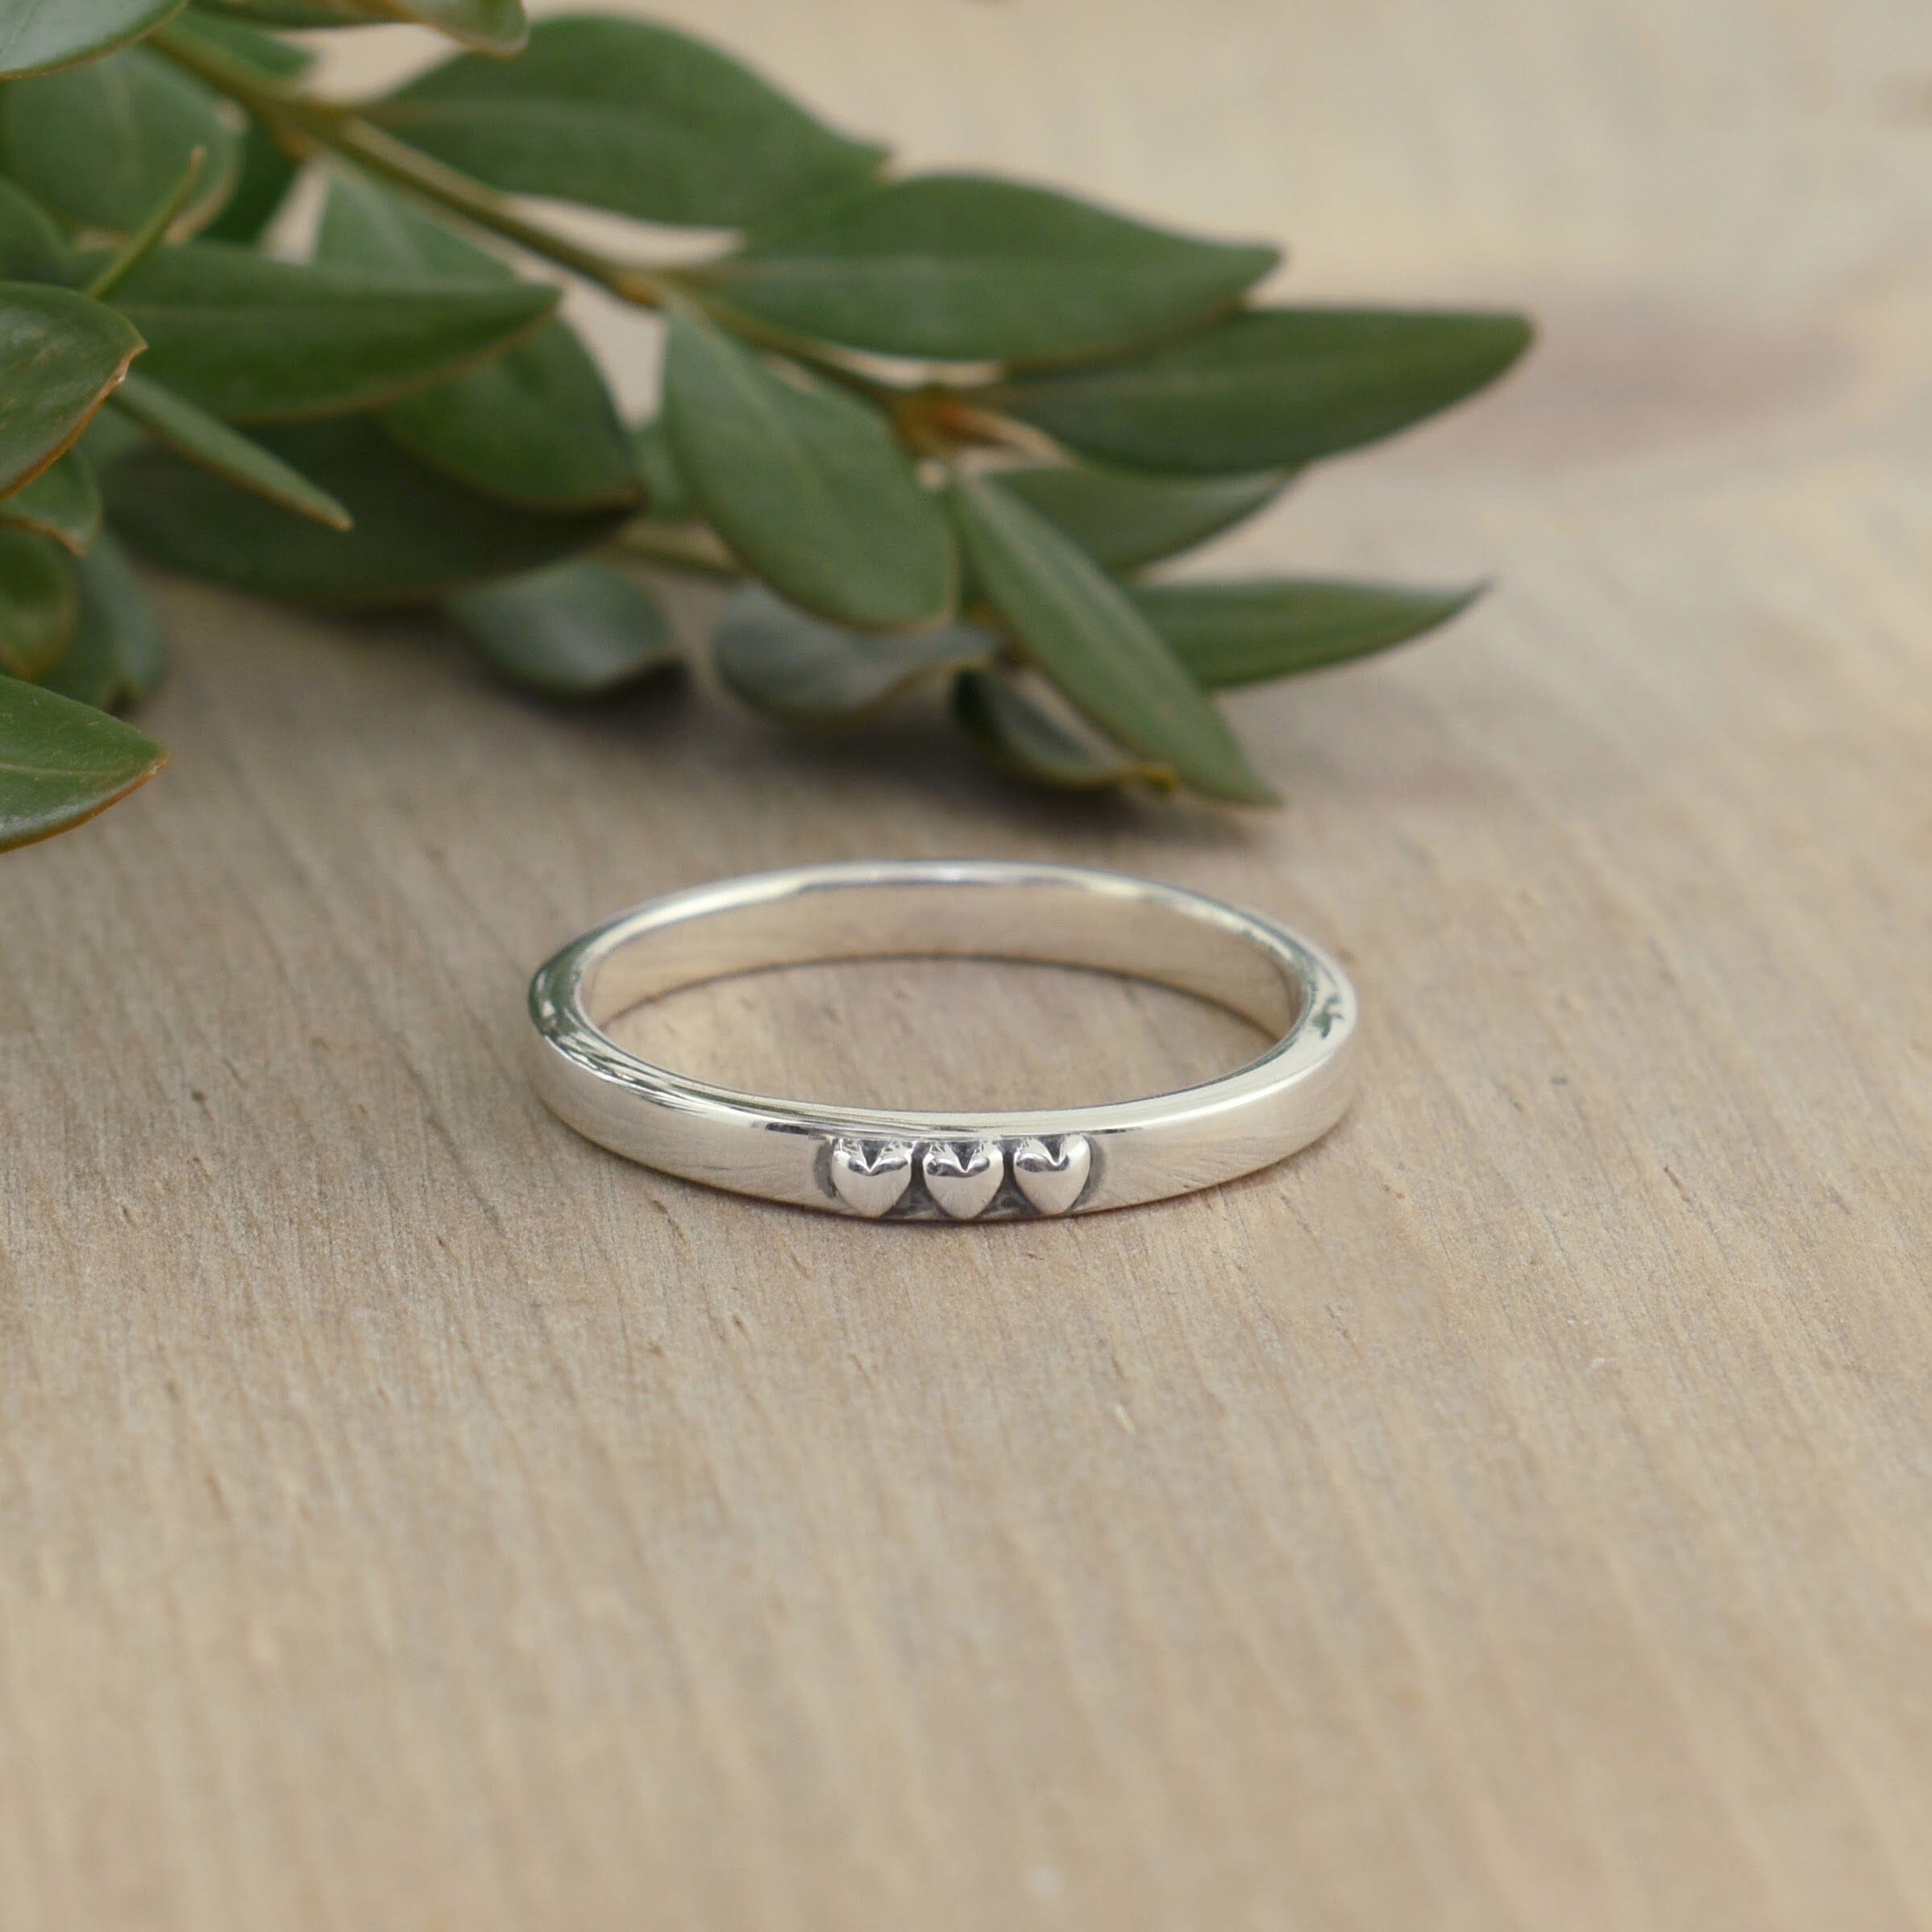 .925 sterling silver stack ring with 3 hearts